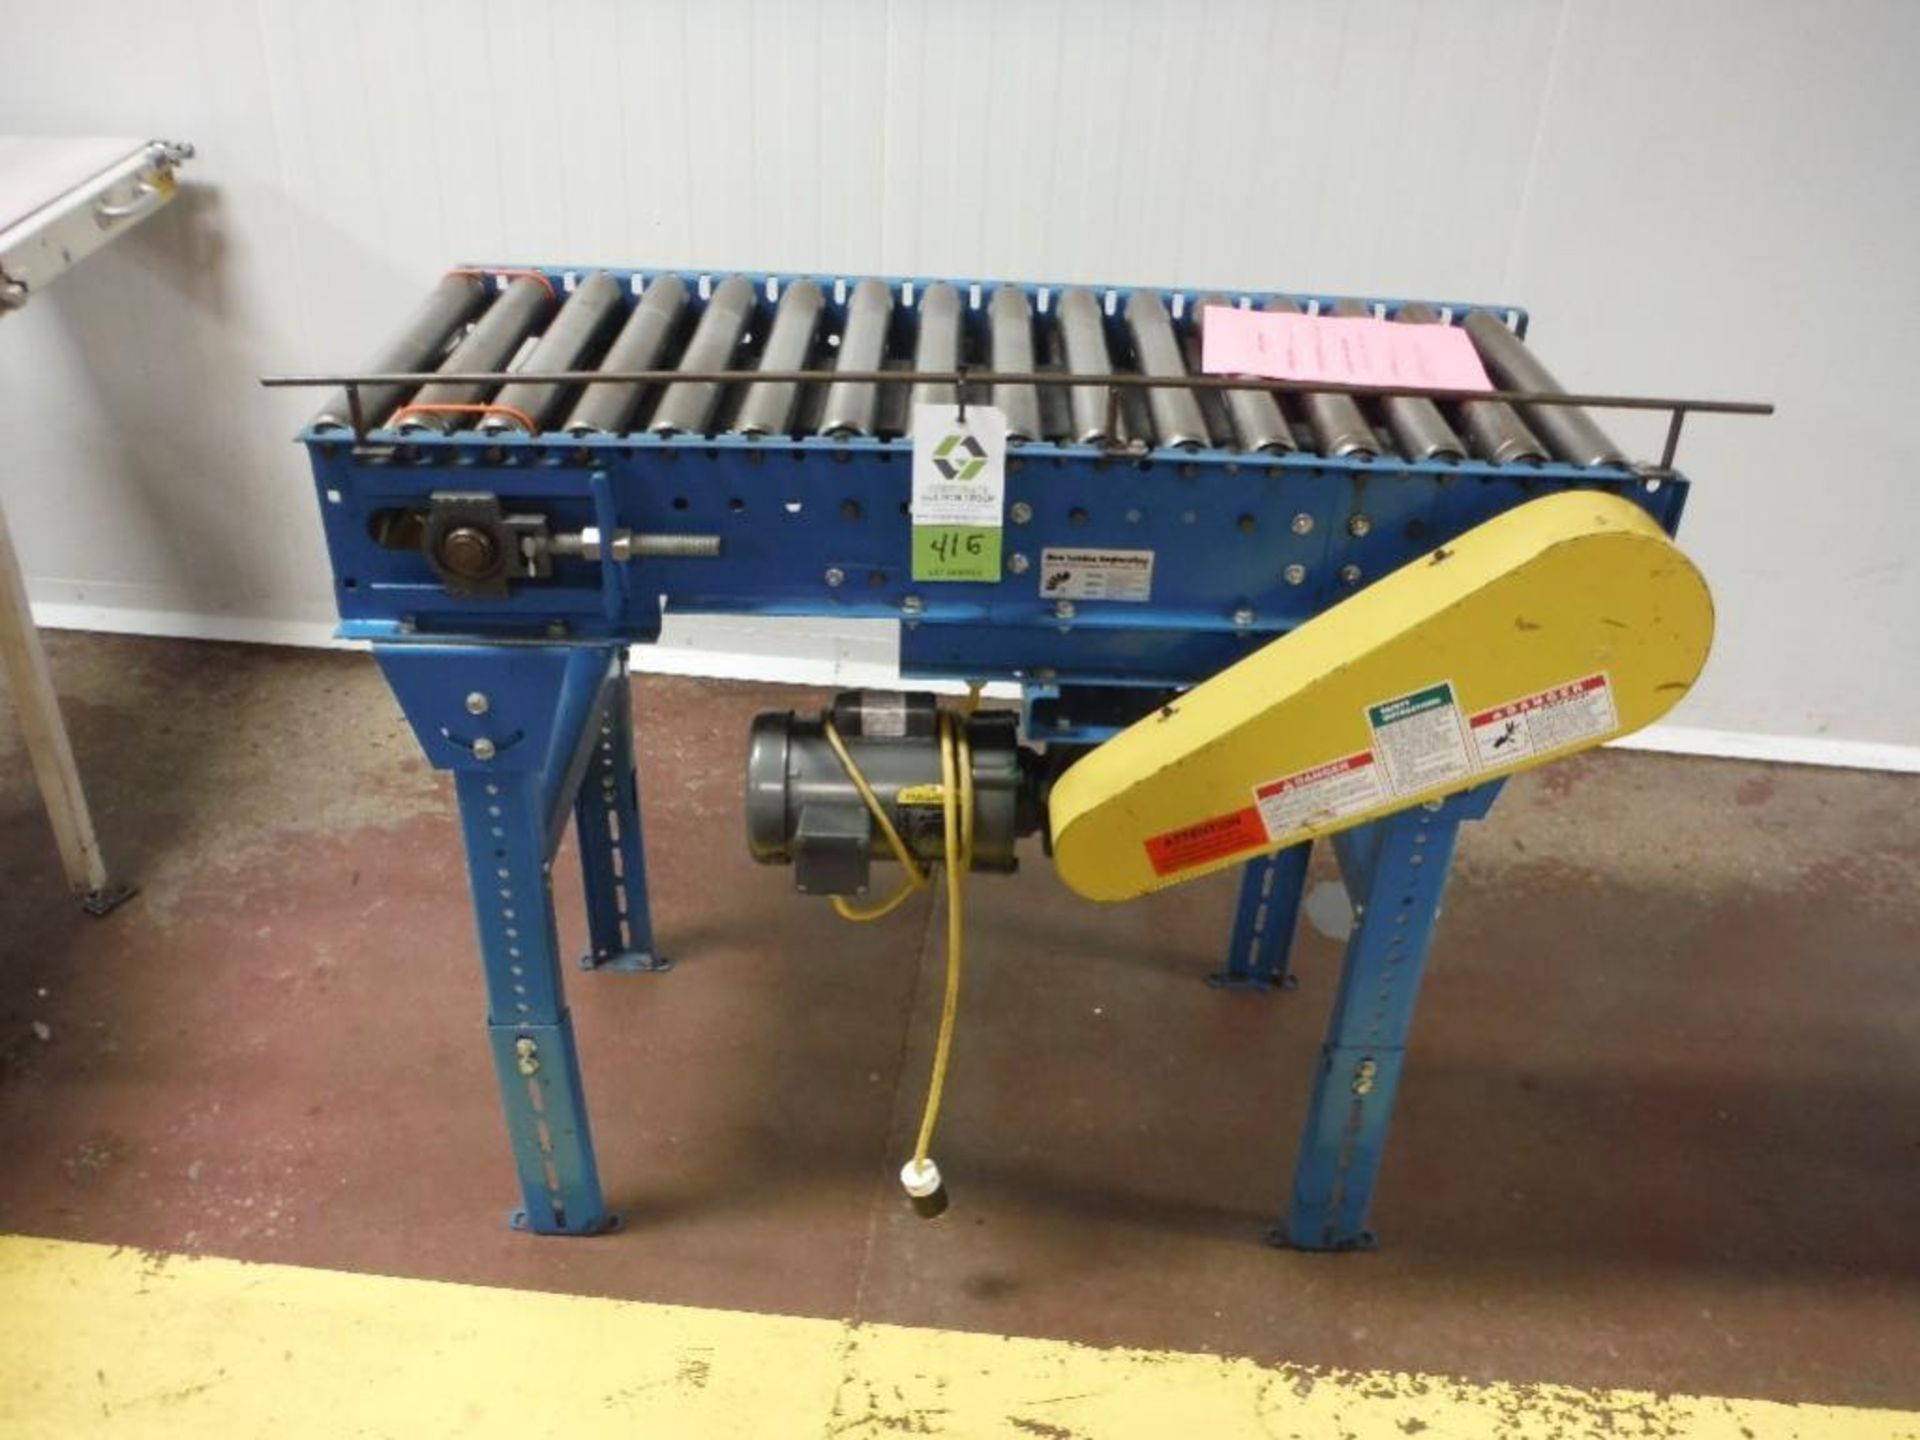 New London powered roller conveyor, 48 in. long x 16 in. wide rollers, motor and drive, steel frame